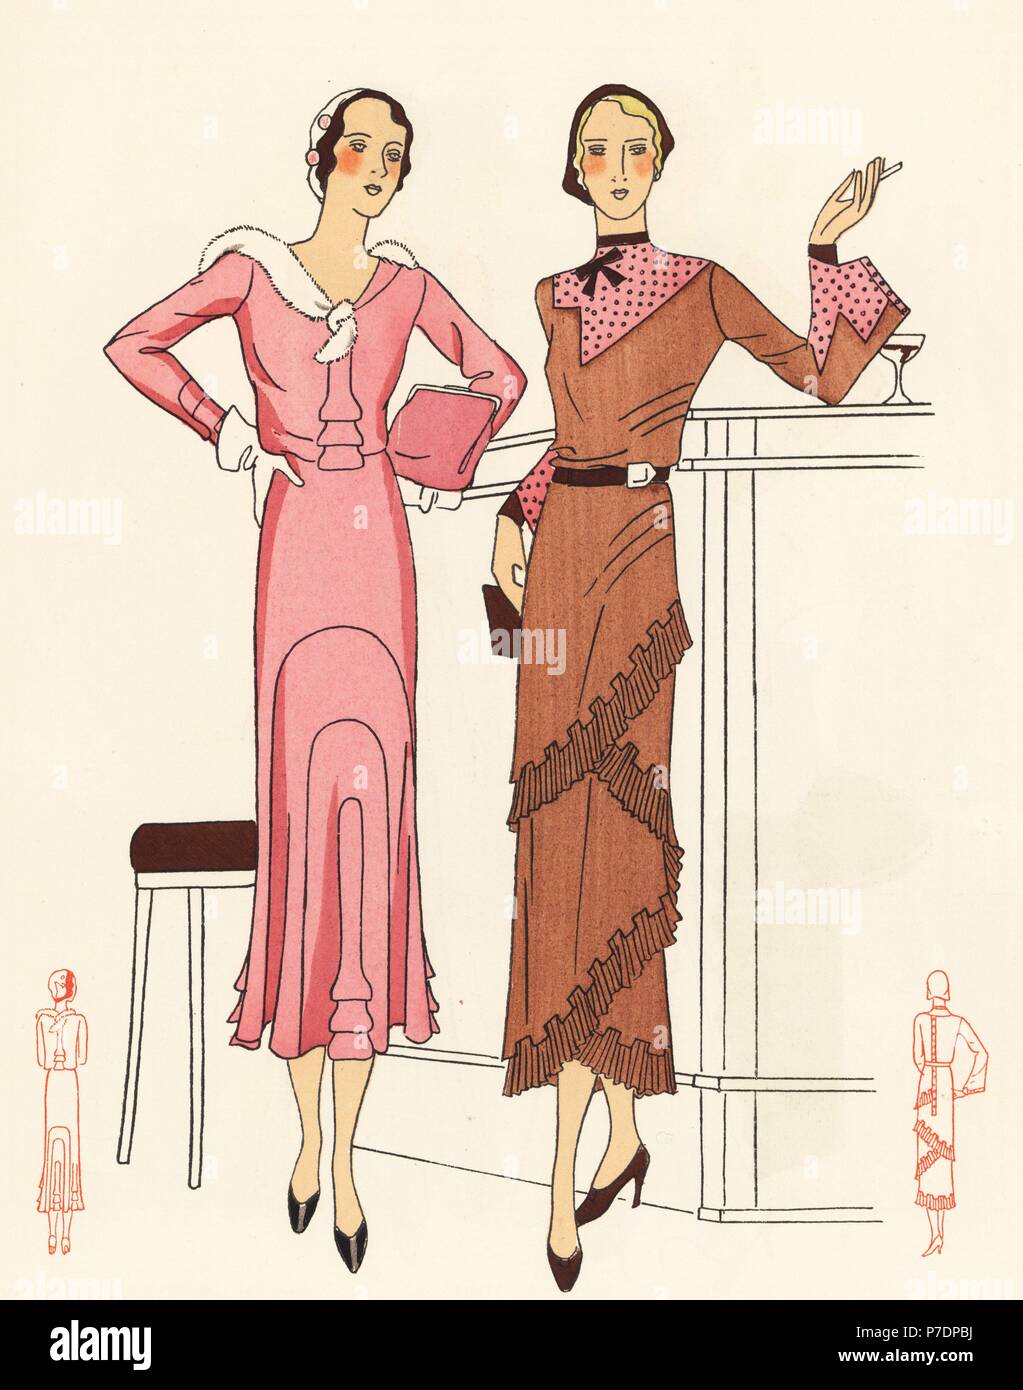 Women smoking and drinking cocktails at a bar. One in an afternoon dress of pink crepe de chine, and the other in a dress of wool voile with cuffs and collar of English embroidery. Handcolored pochoir (stencil) lithograph from the French luxury fashion magazine Art, Gout, Beaute, 1931. Stock Photo